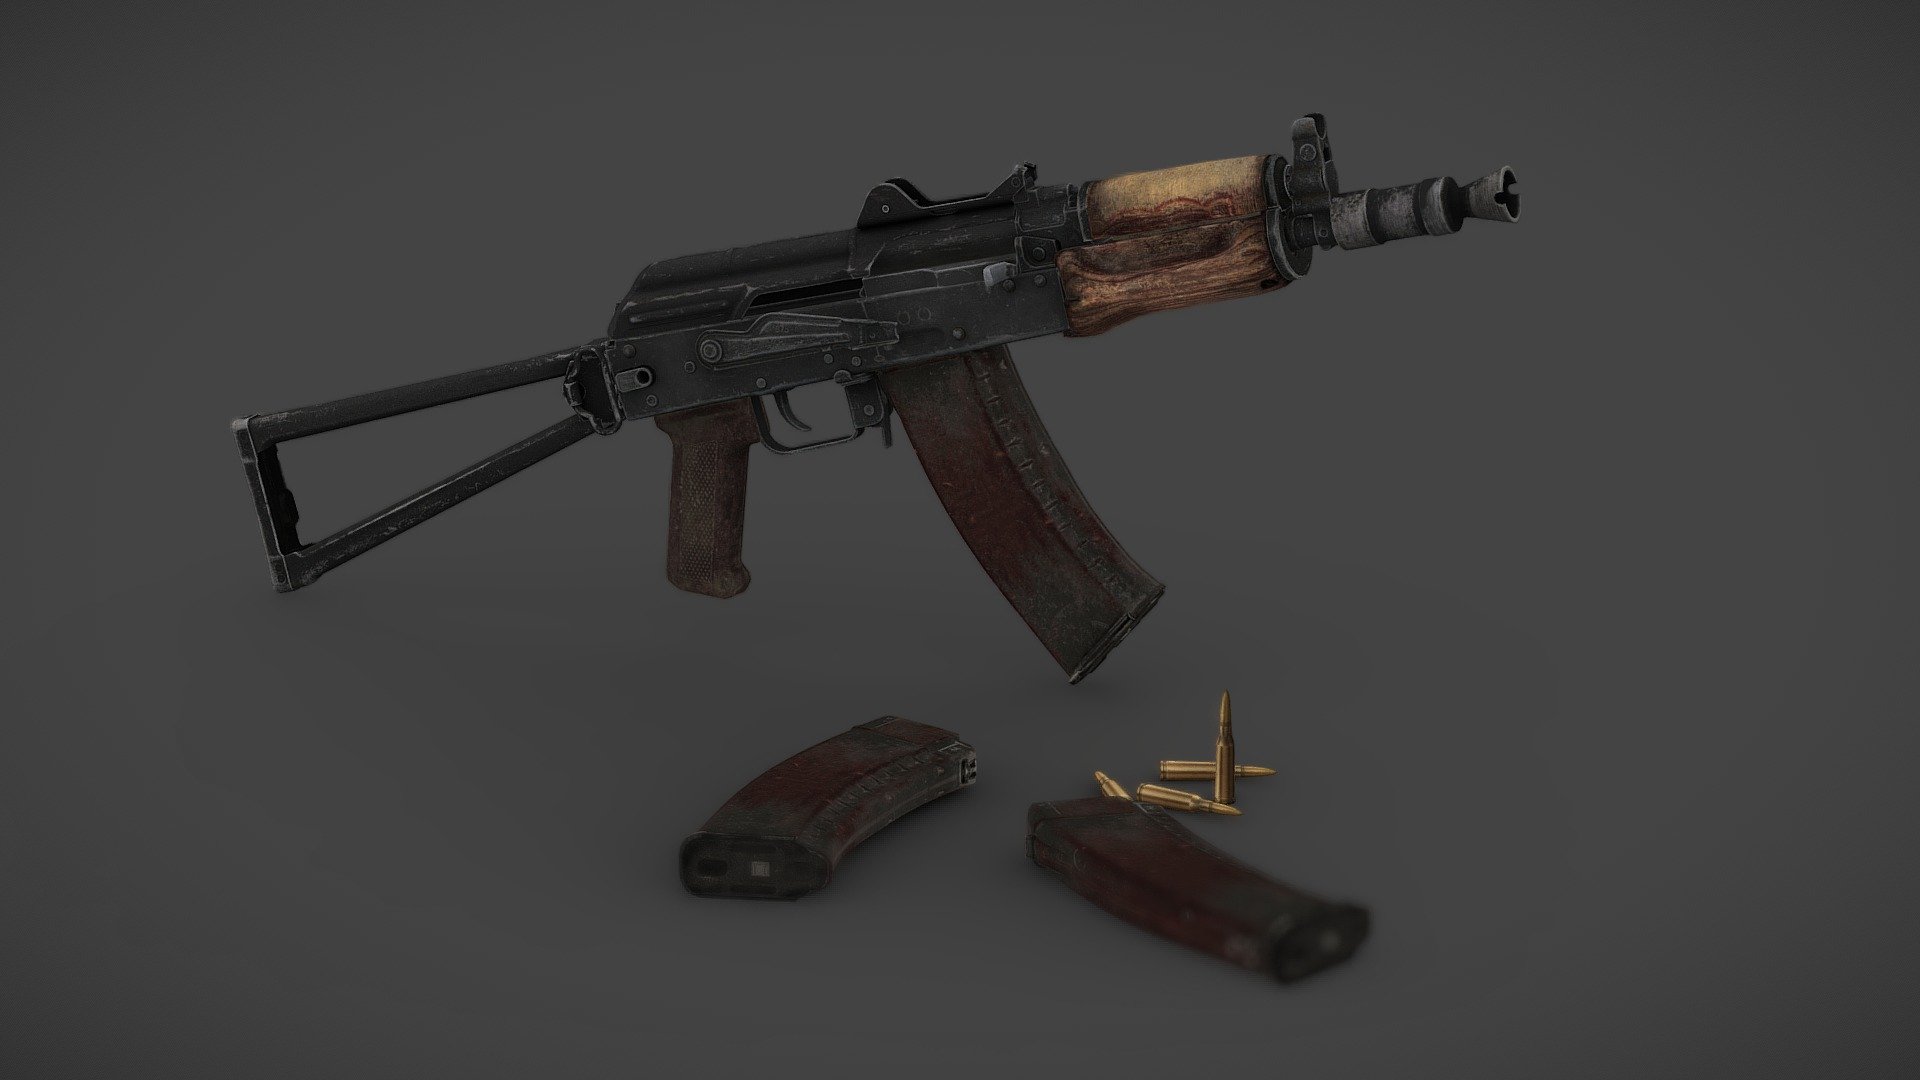 AKSU-74 rifle.

Originally modeled in 3ds Max 2016. Downloads include .dae, .fbx, .obj.
Texture format TGA.

The model is ready for animation. Movable objects include: charging handle, fire switch, bolt delay, magazine, and trigger.

The scale is close to real size (in centimeters) 3d model